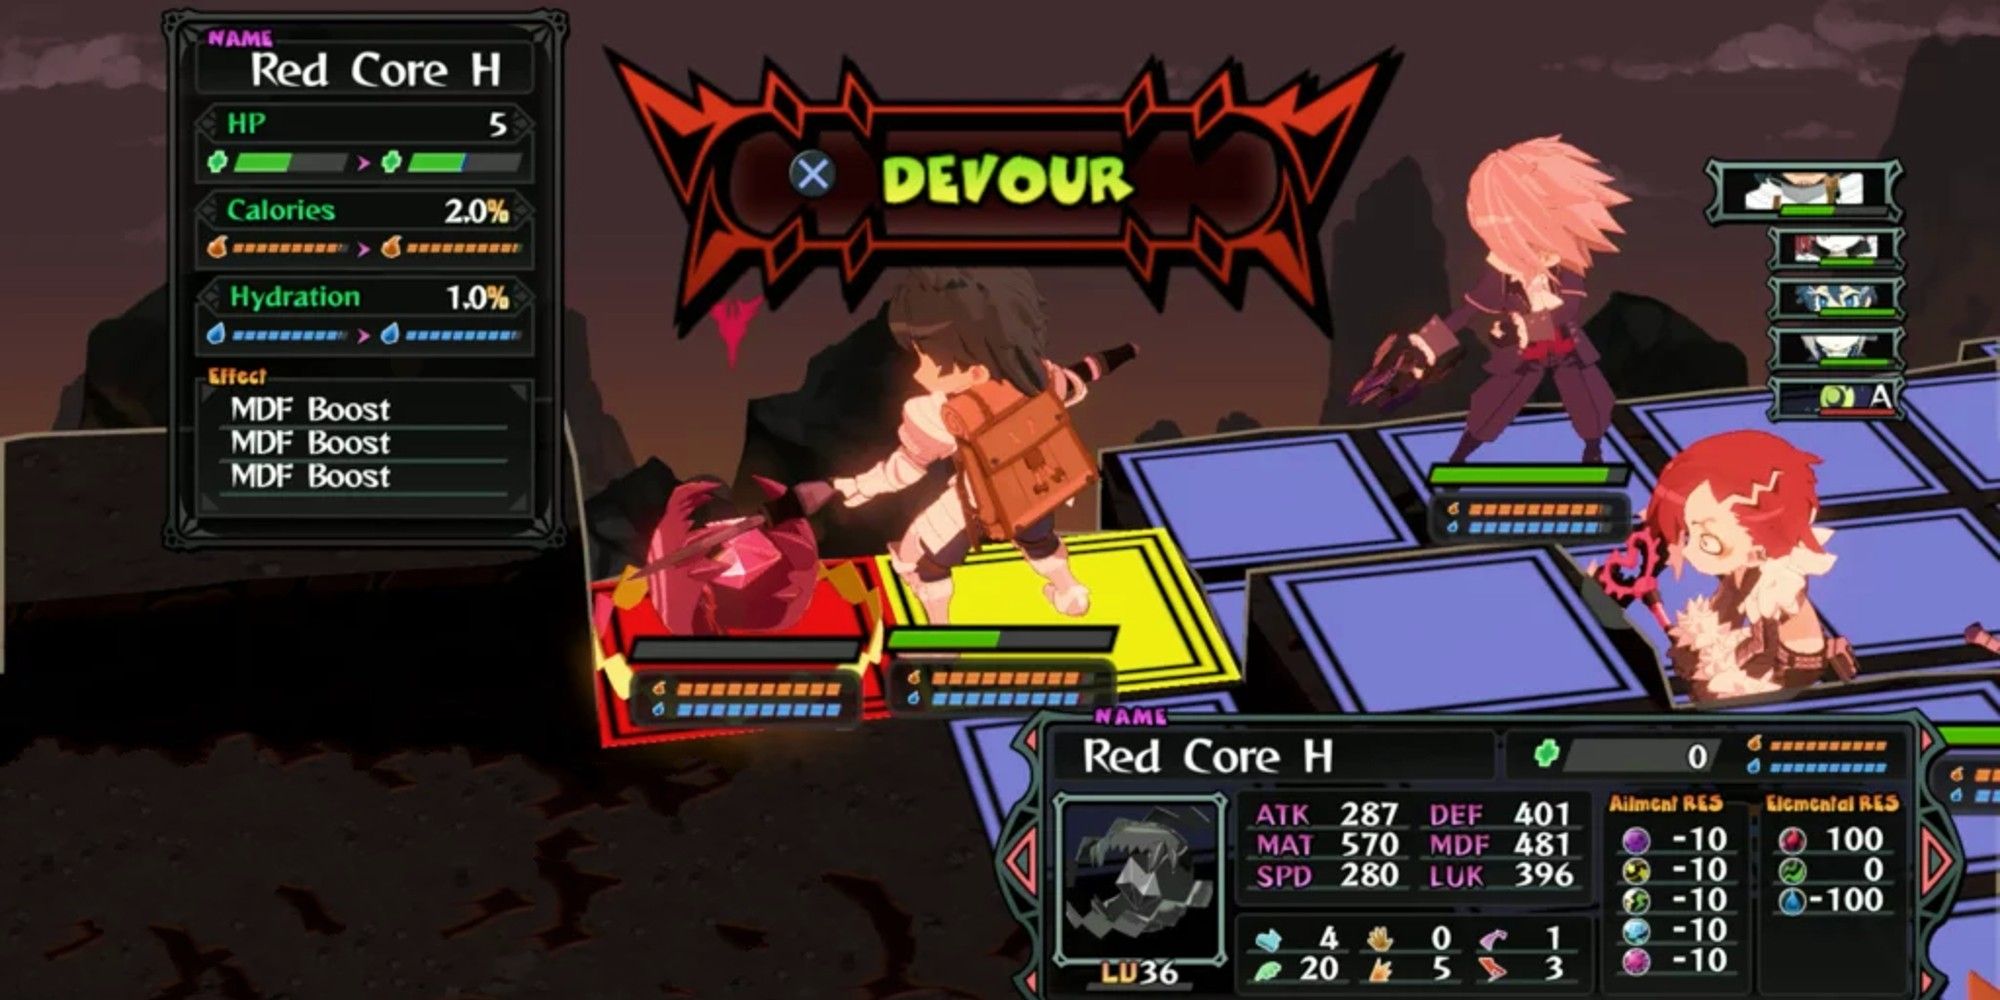 Players prepare to devour the Red Core.